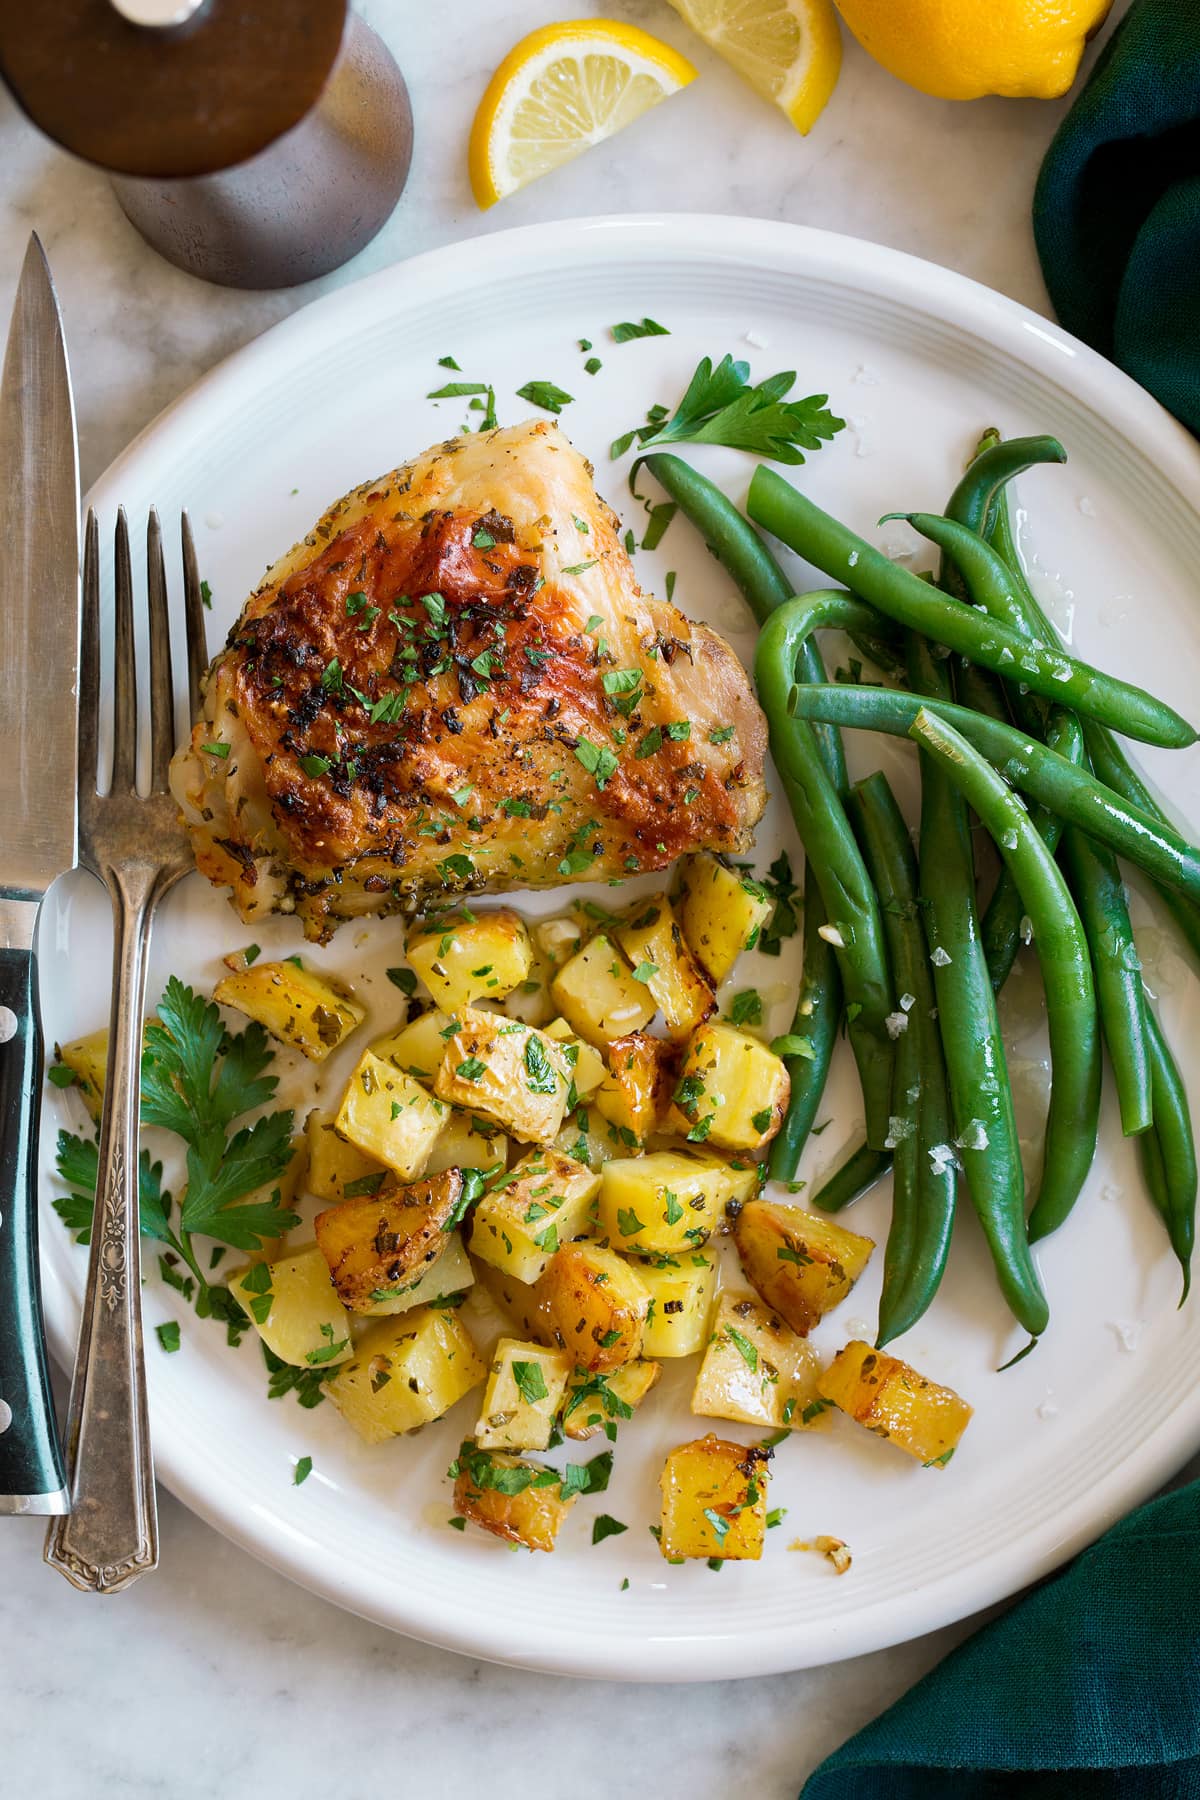 A dish with baked chicken thighs and potatoes with a side of green beans. Shown from above.